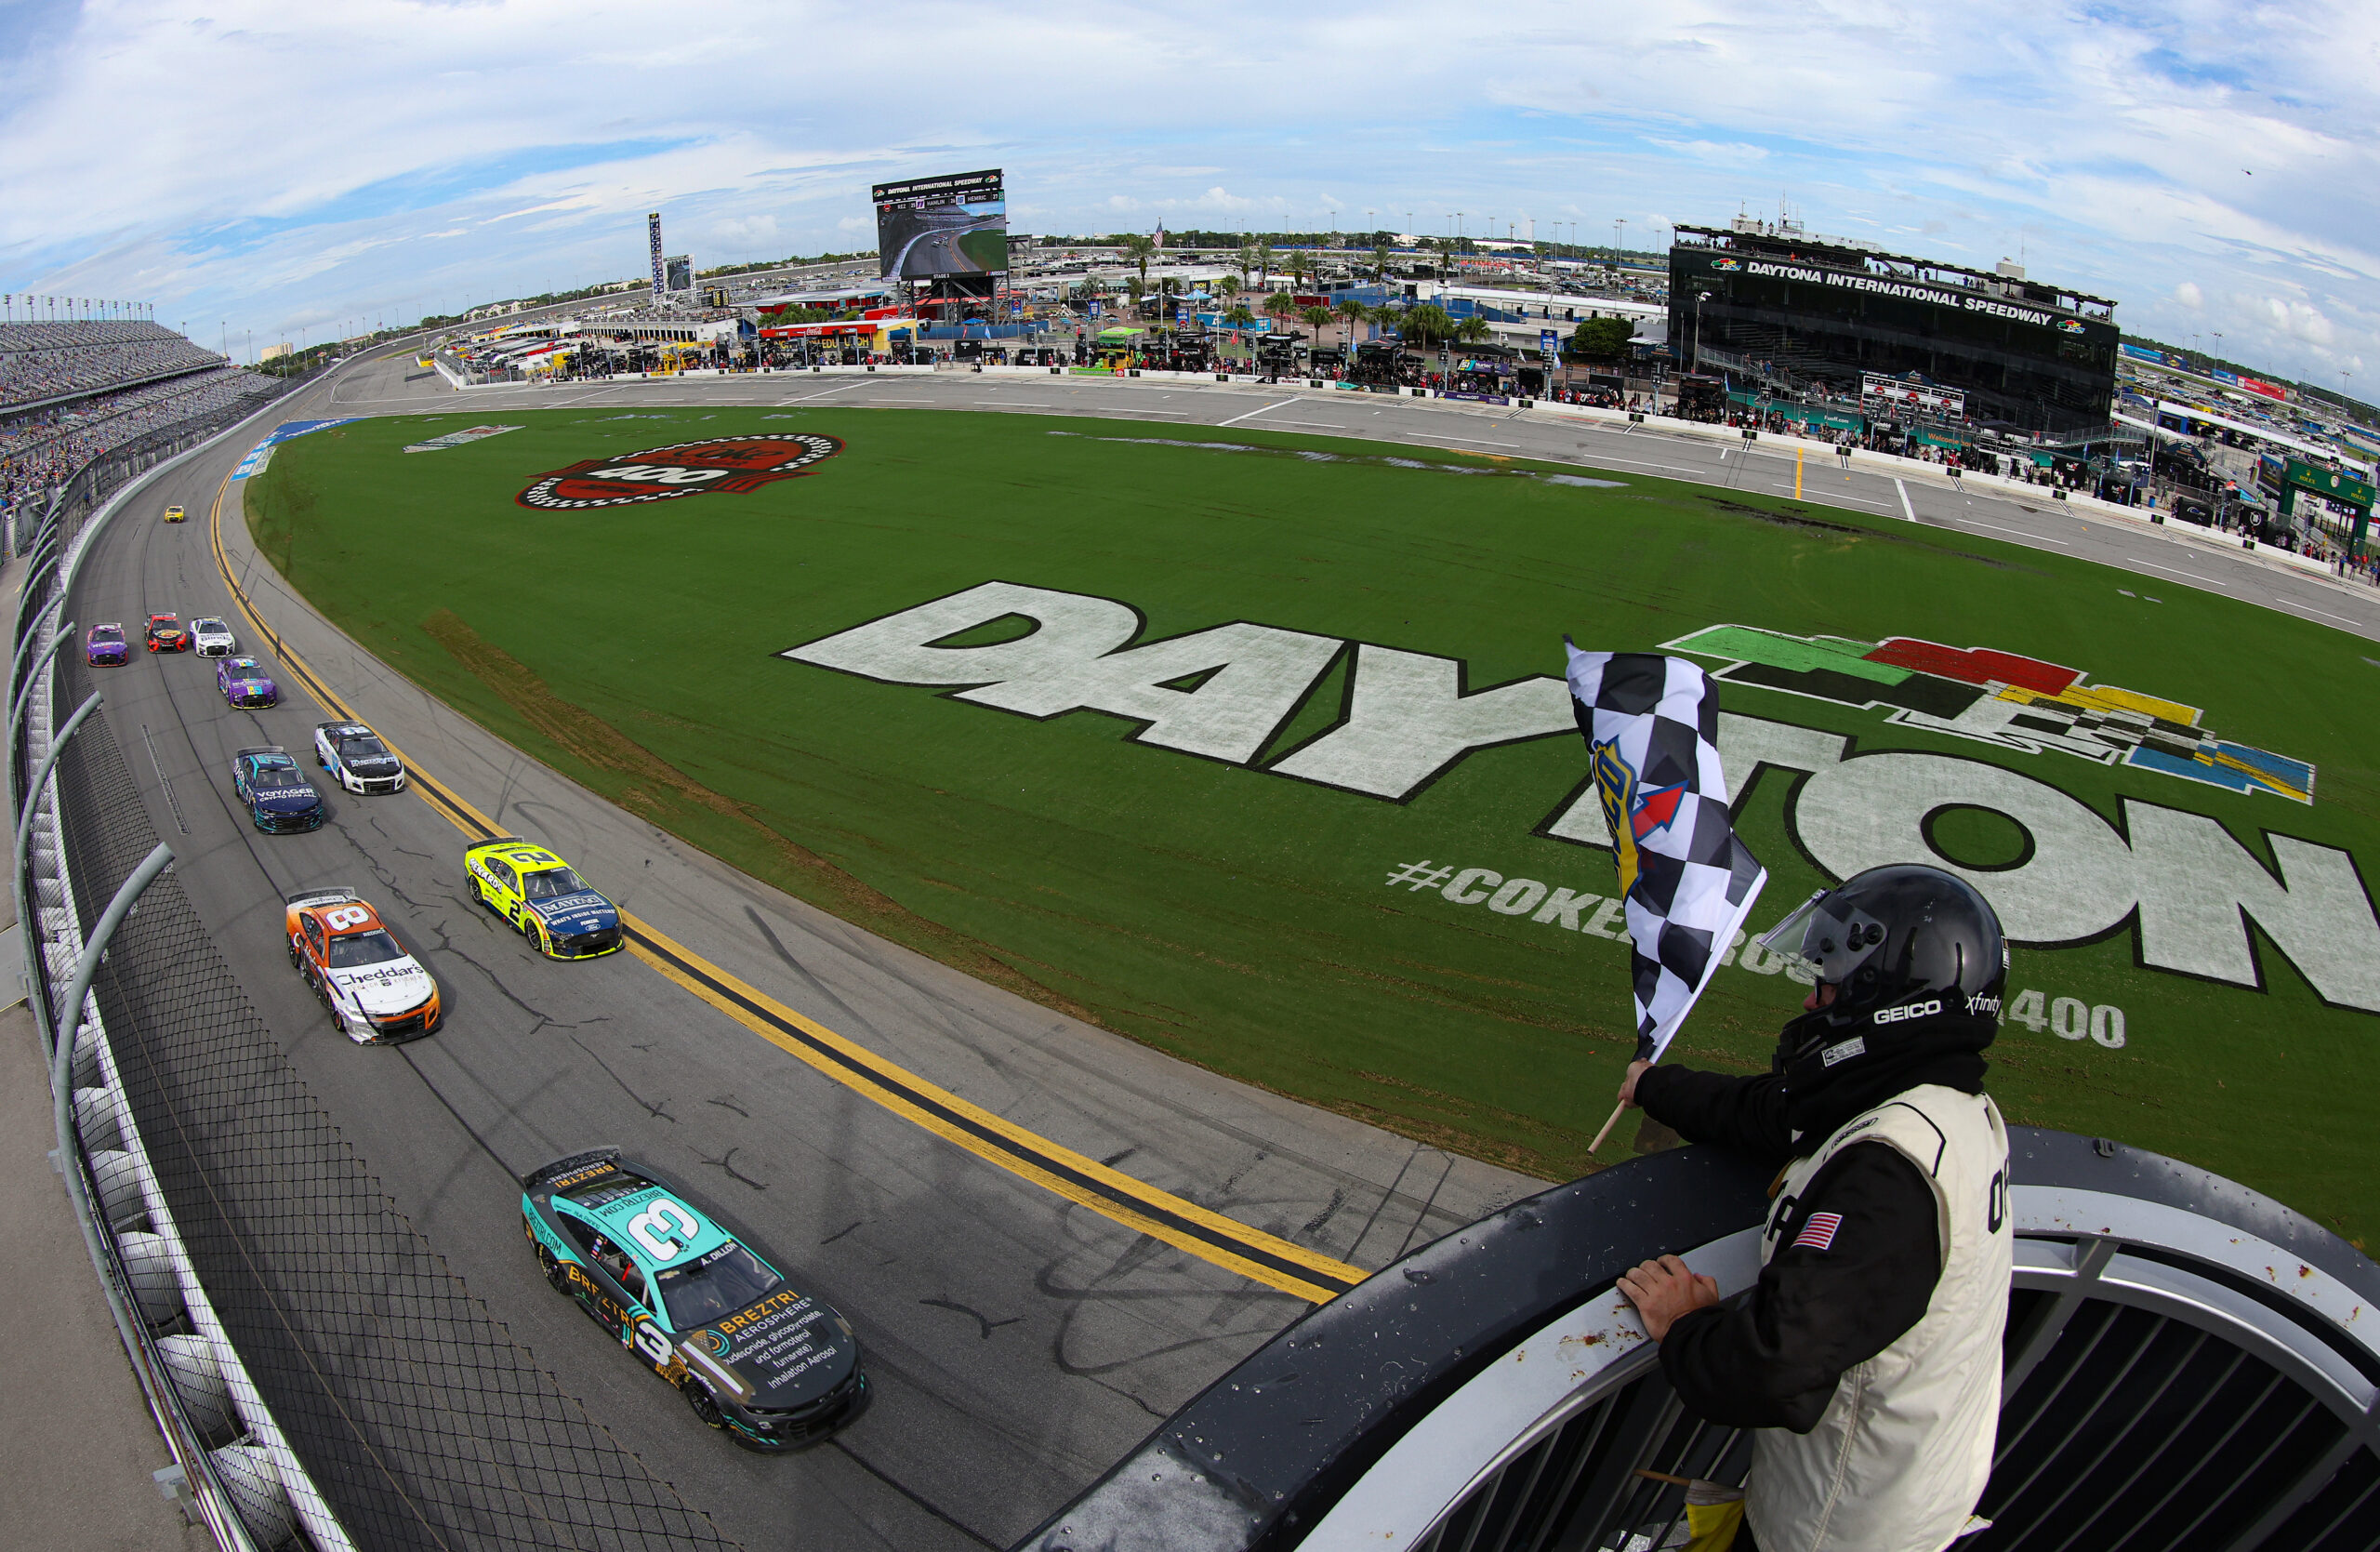 Daytona is the last chance for some big-name NASCAR drivers to make a championship run